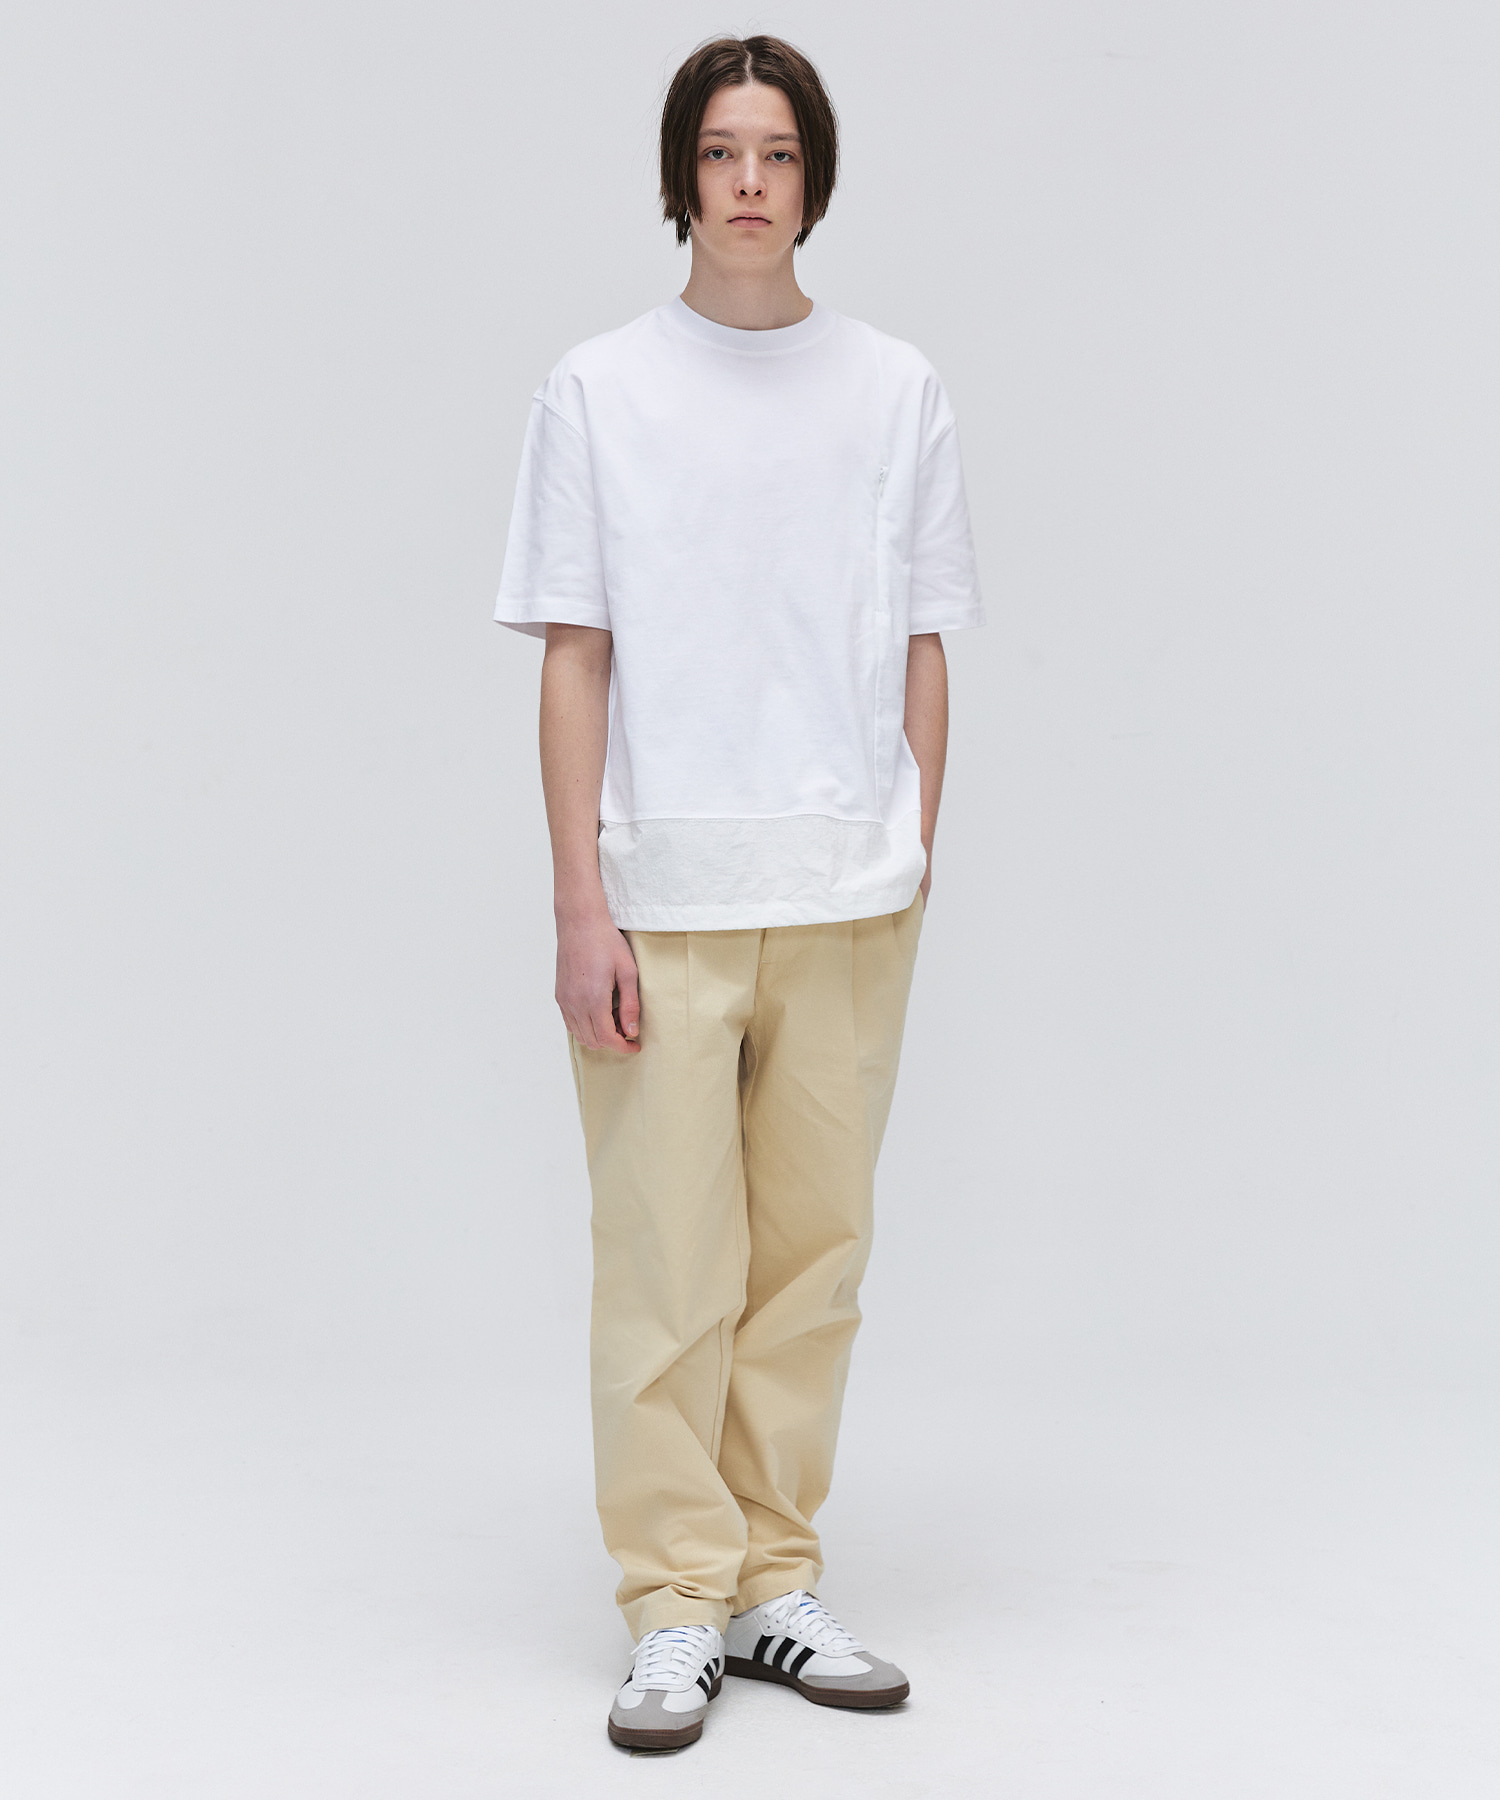 Wooven Layered Pocket T-shirt - White